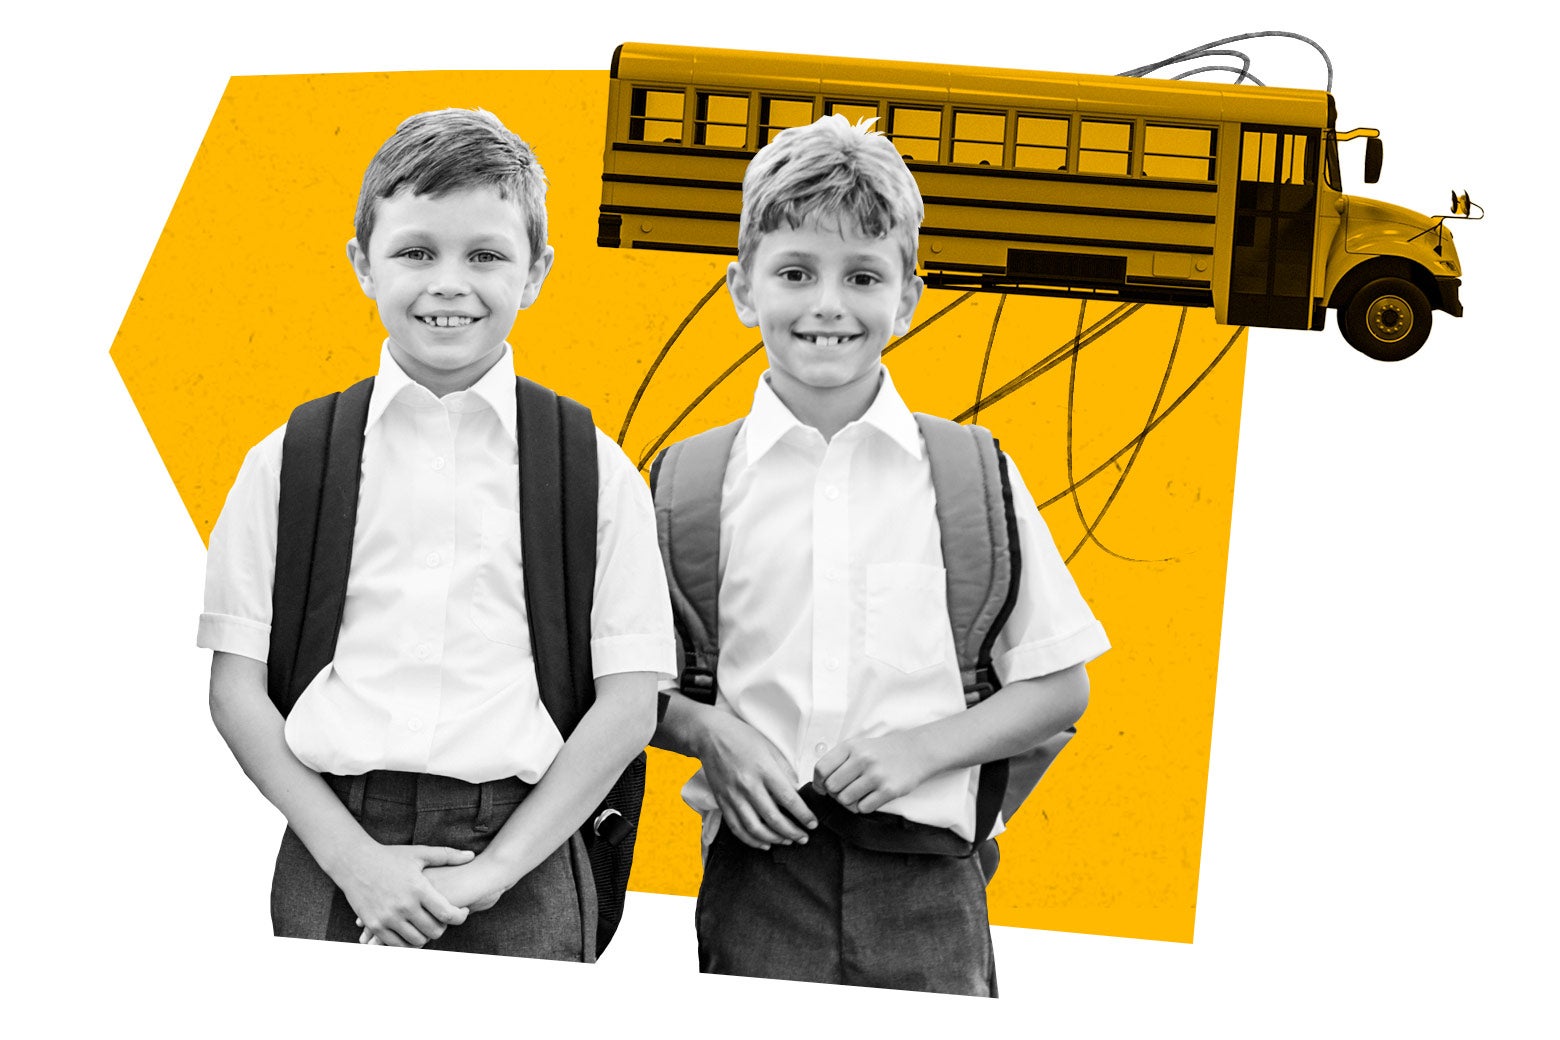 Collage of two boys wearing school uniforms in front of a school bus